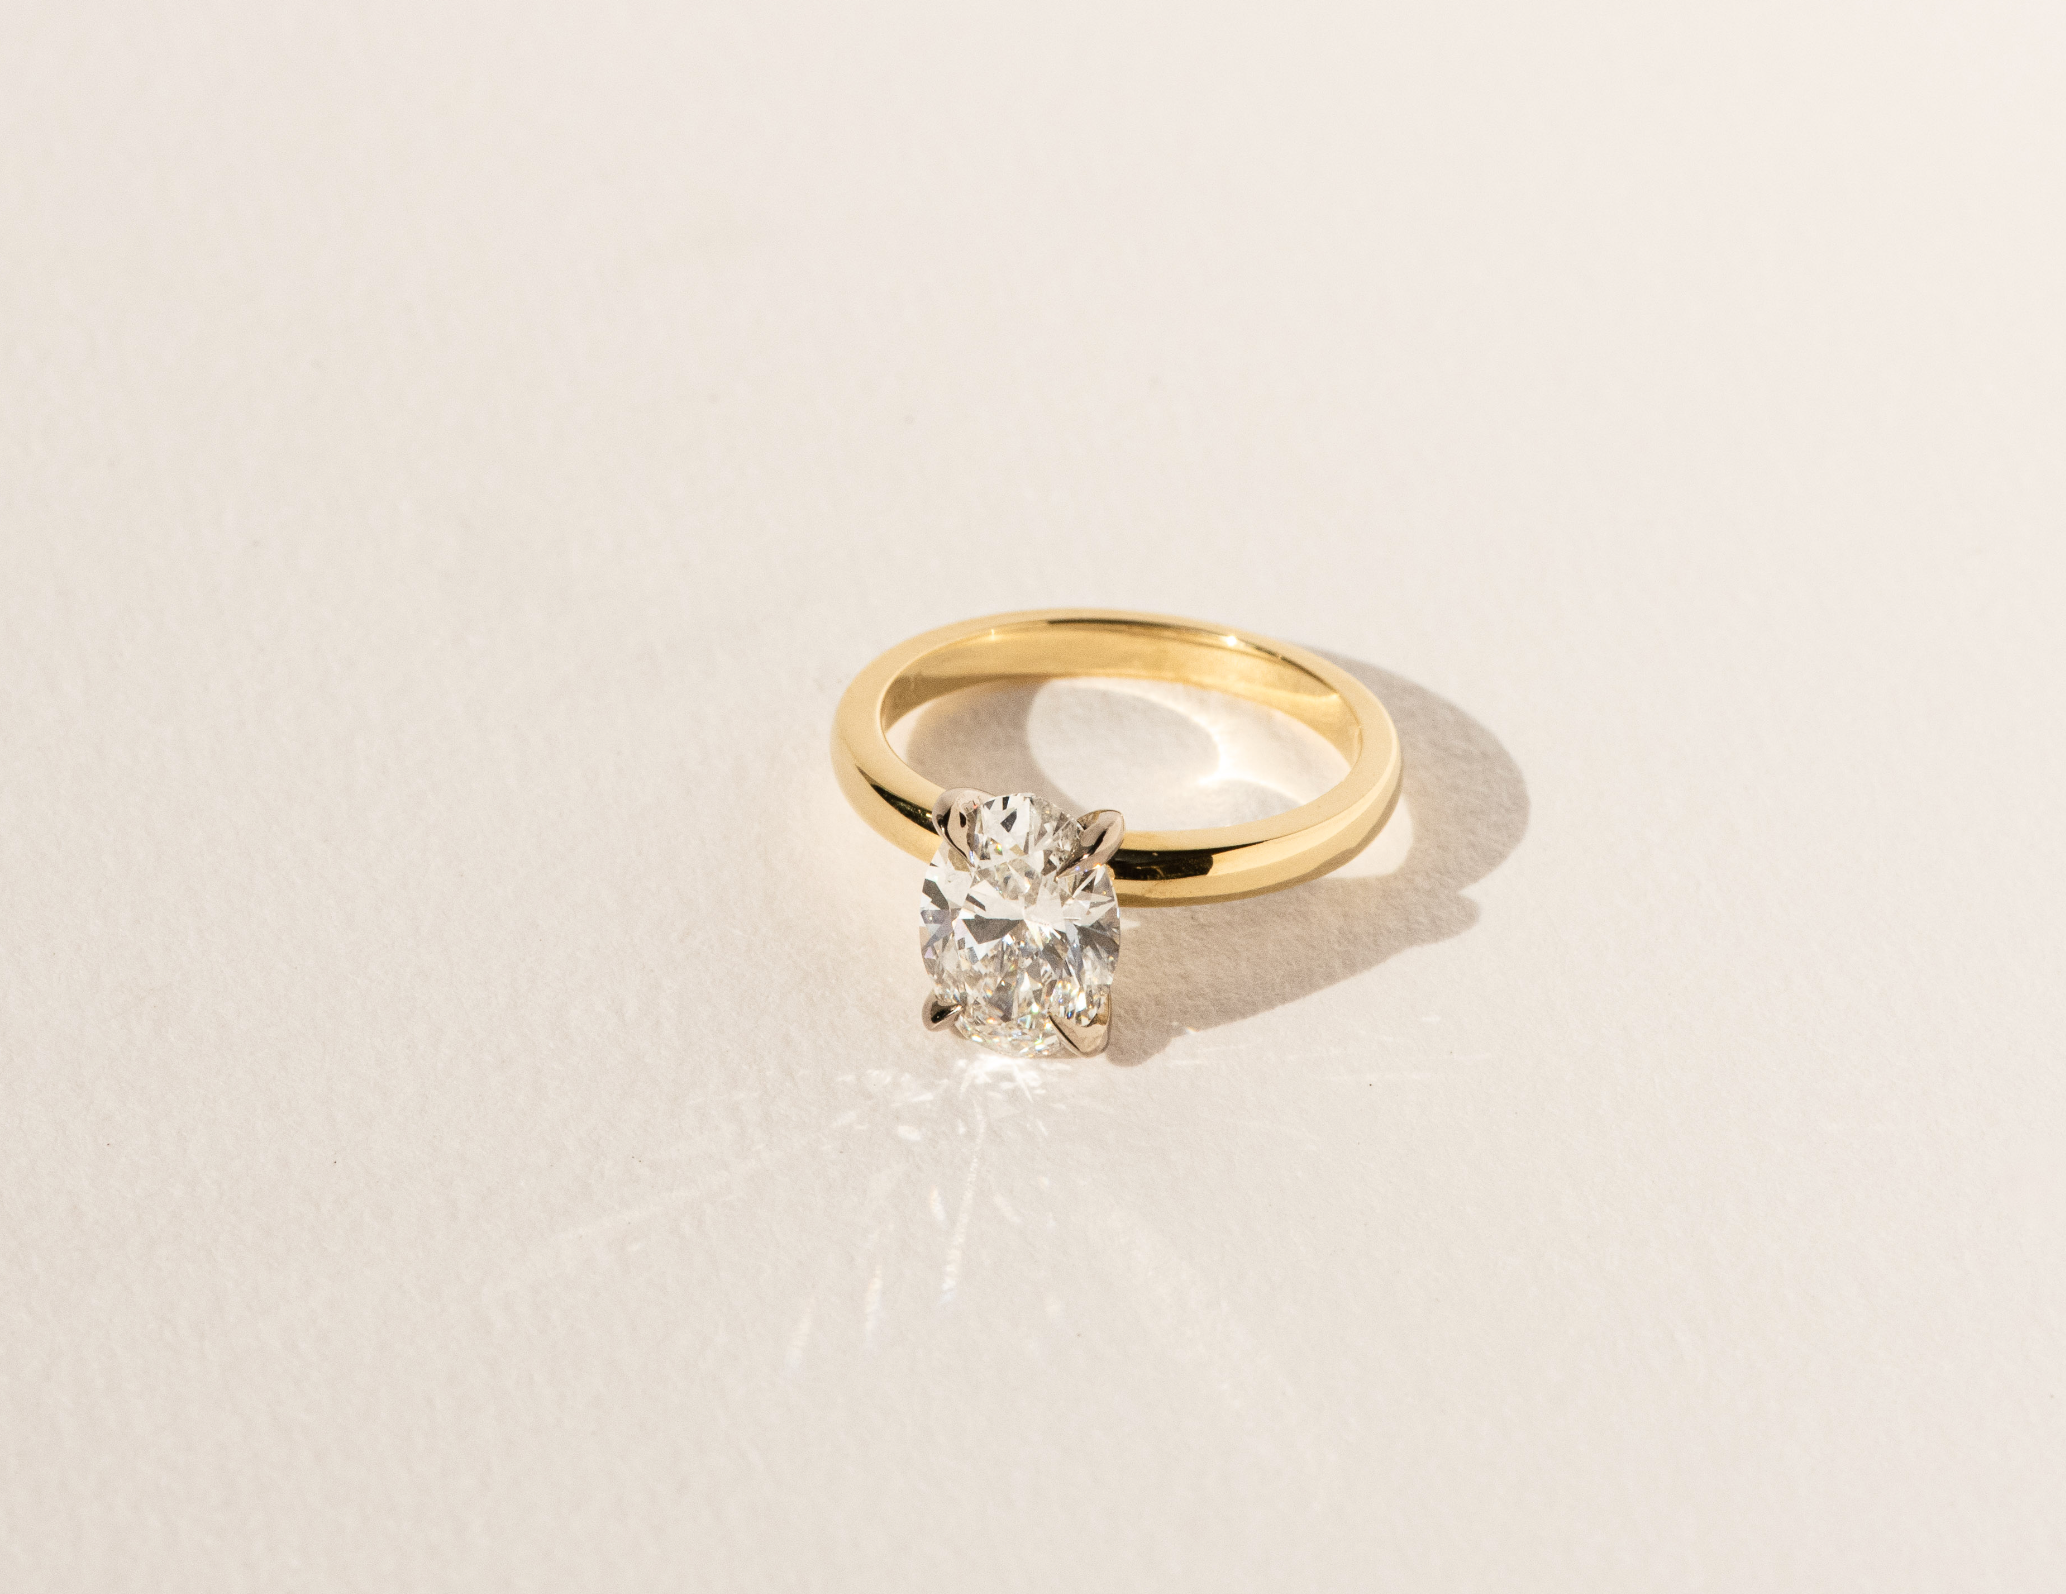 Oval Diamond Solitaire - Bespoke Design -Dean & Dust - Four Claw